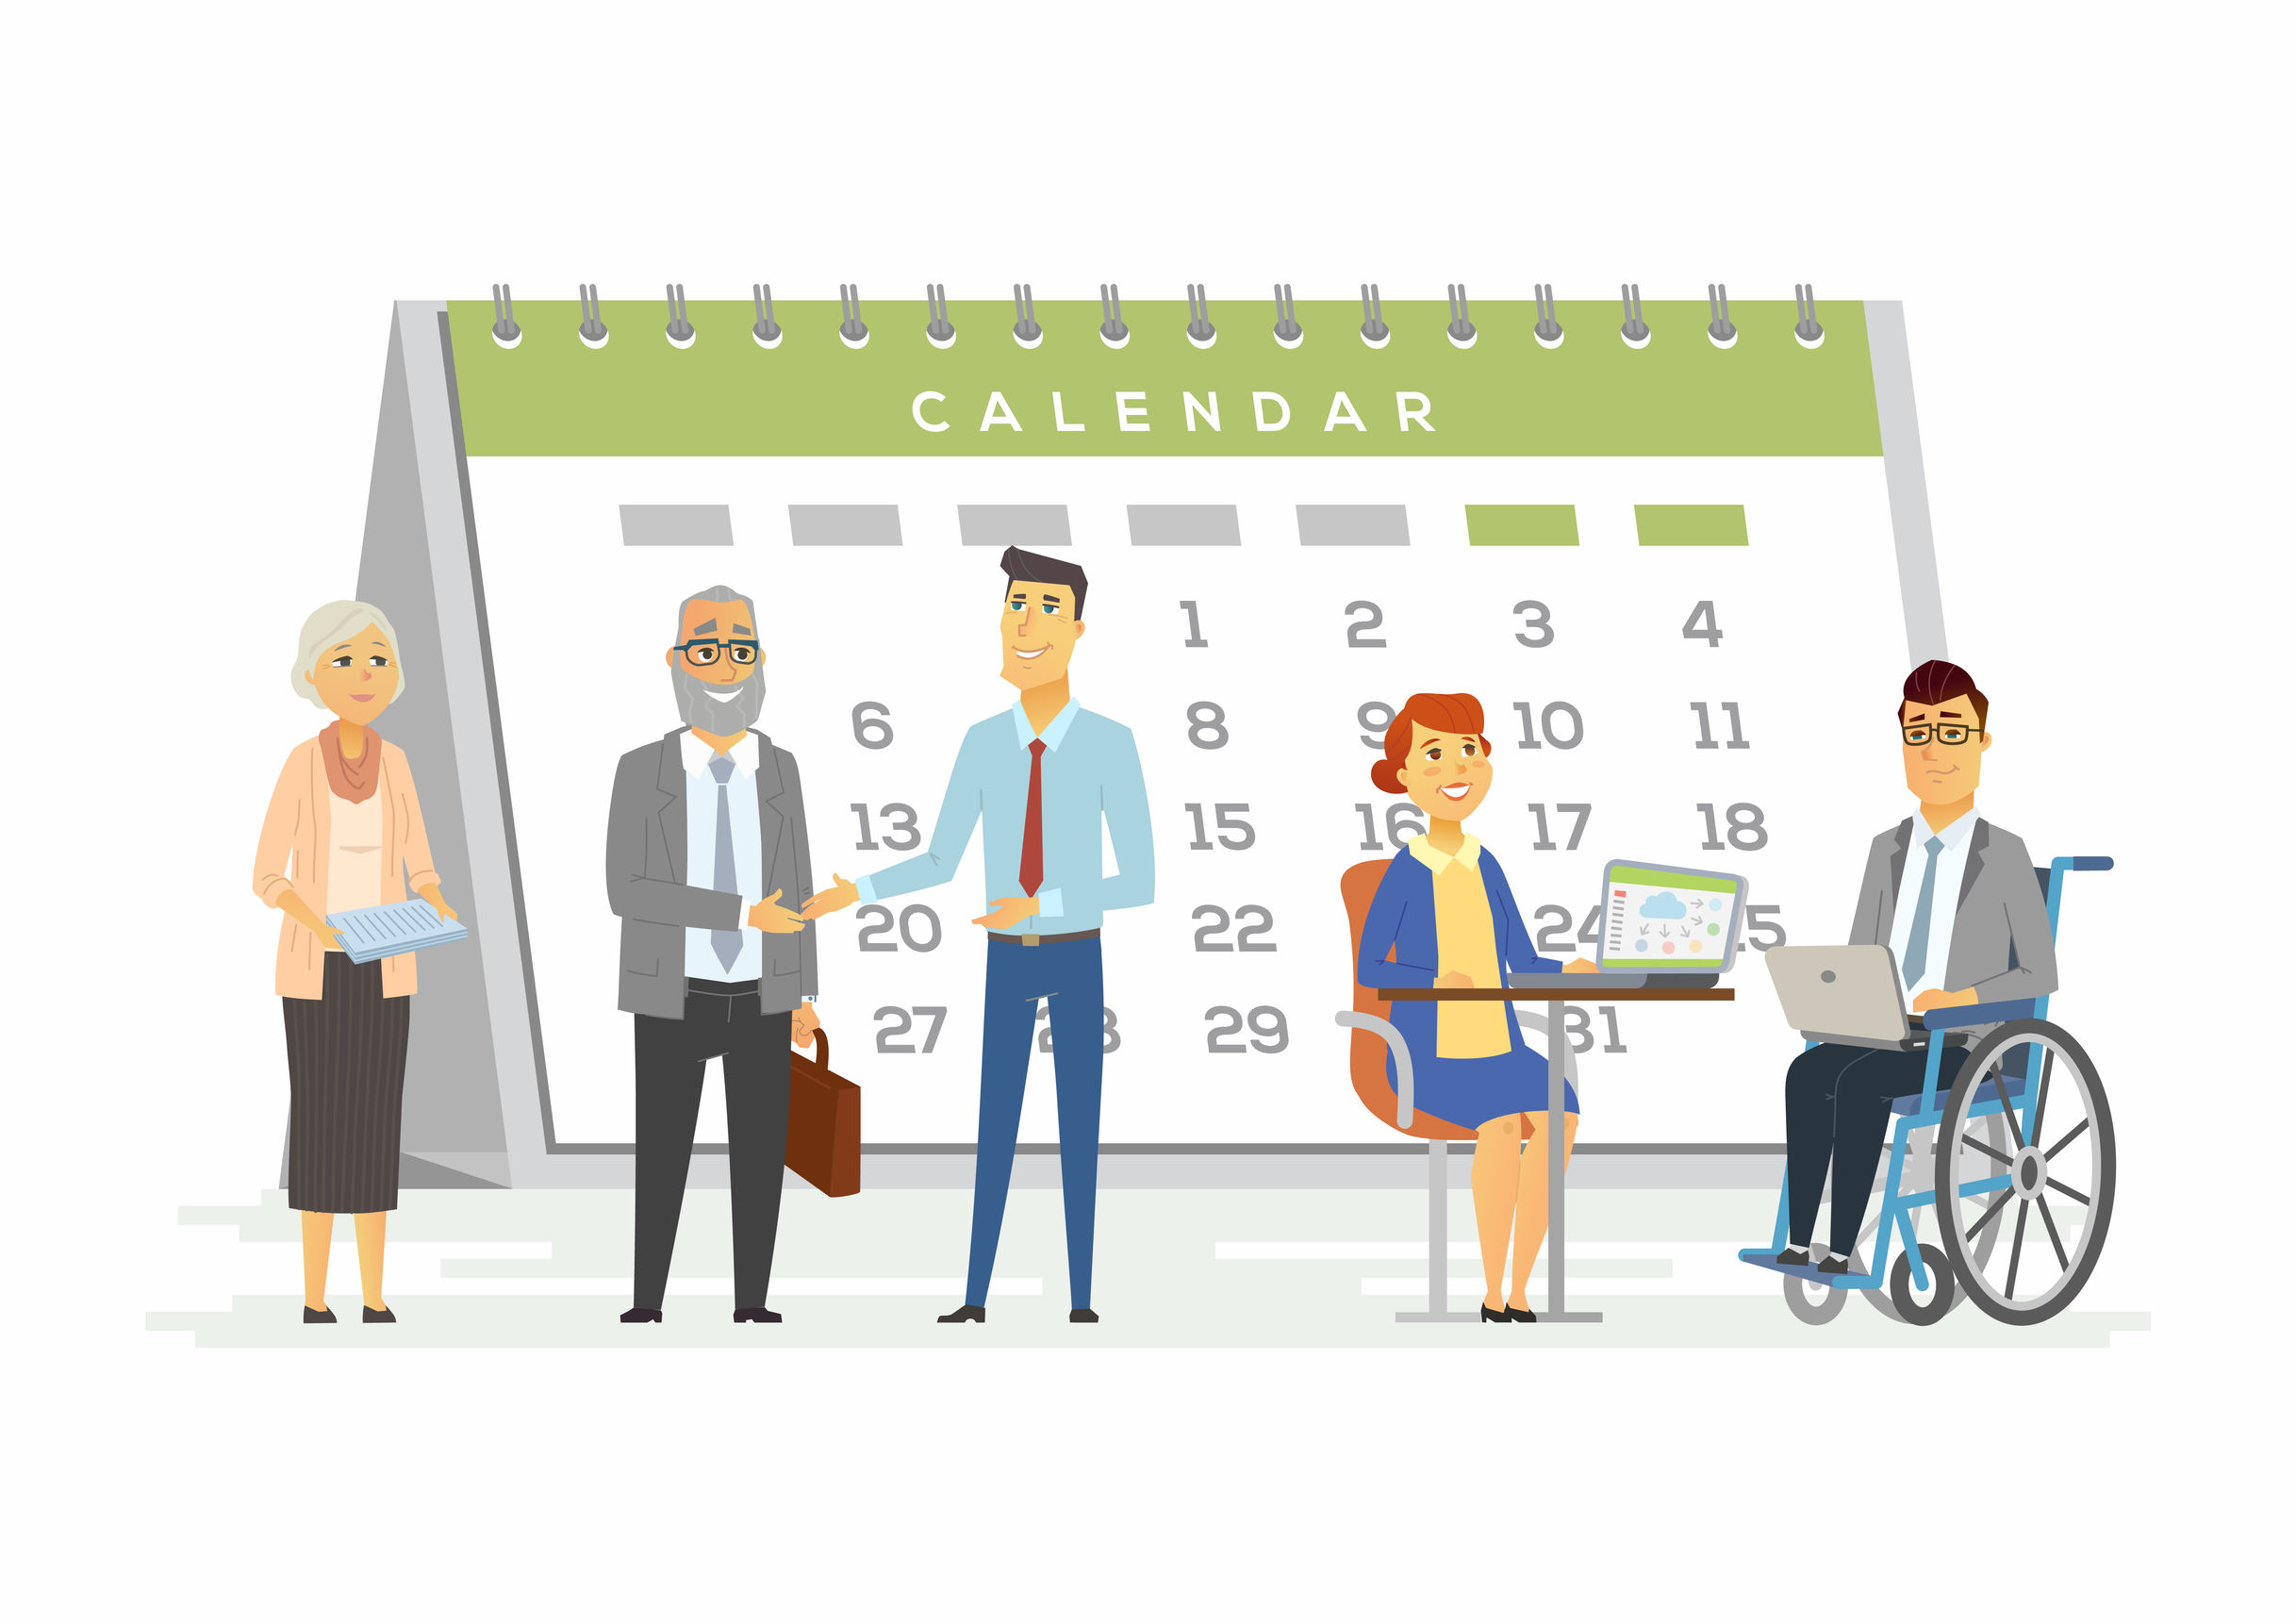 Image of a blown-up calendar with figures of office workers in front, including an employee on wheechair.